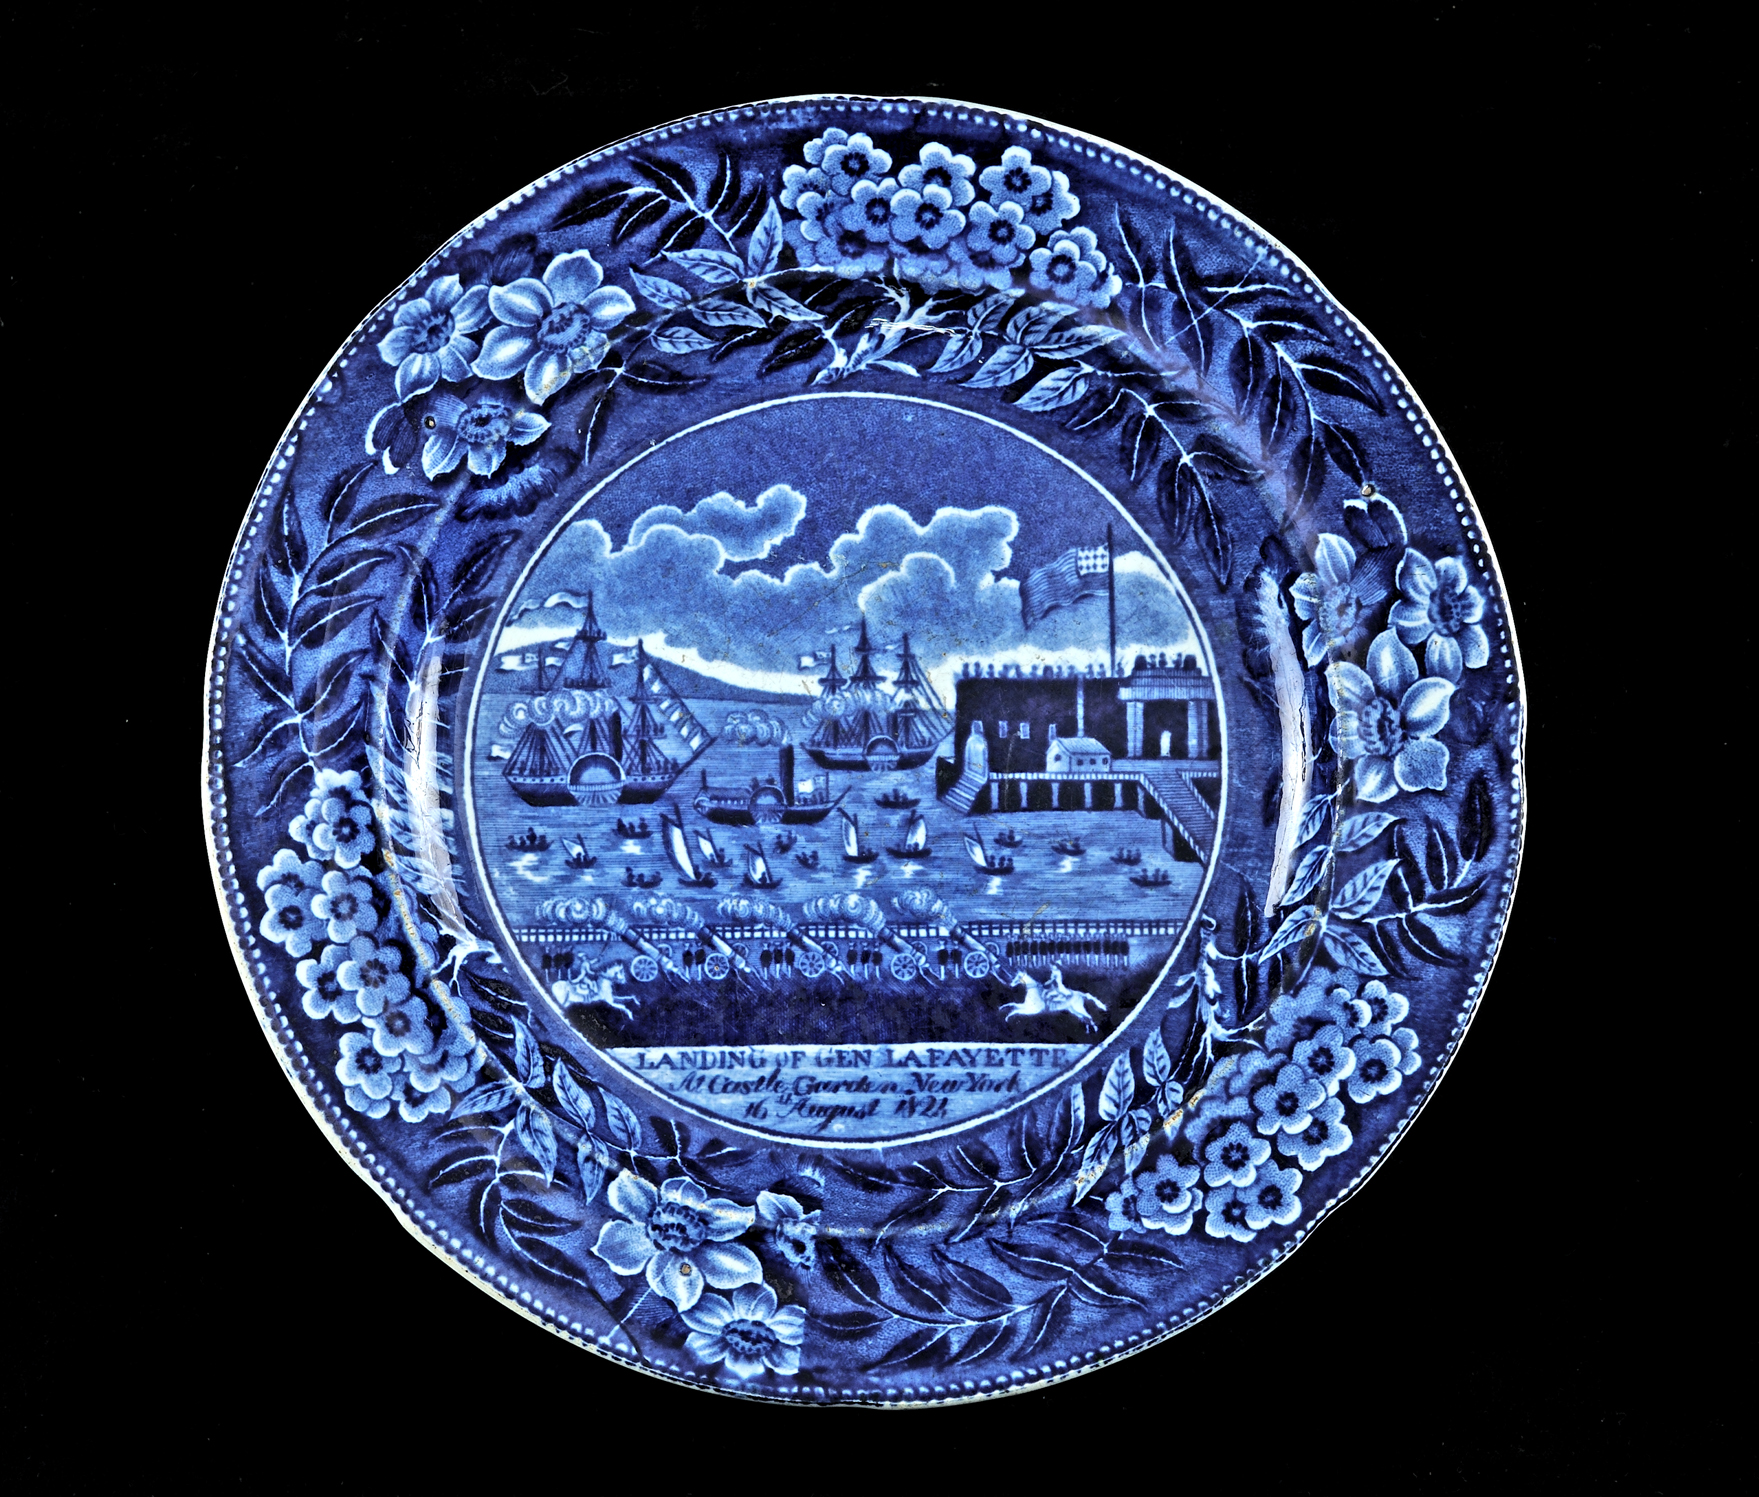 Plate commemorating the landing of General Lafayette at Castle Garden in New York, 16th August 1824 by Clews, Staffordshire, England, ca. 1824.